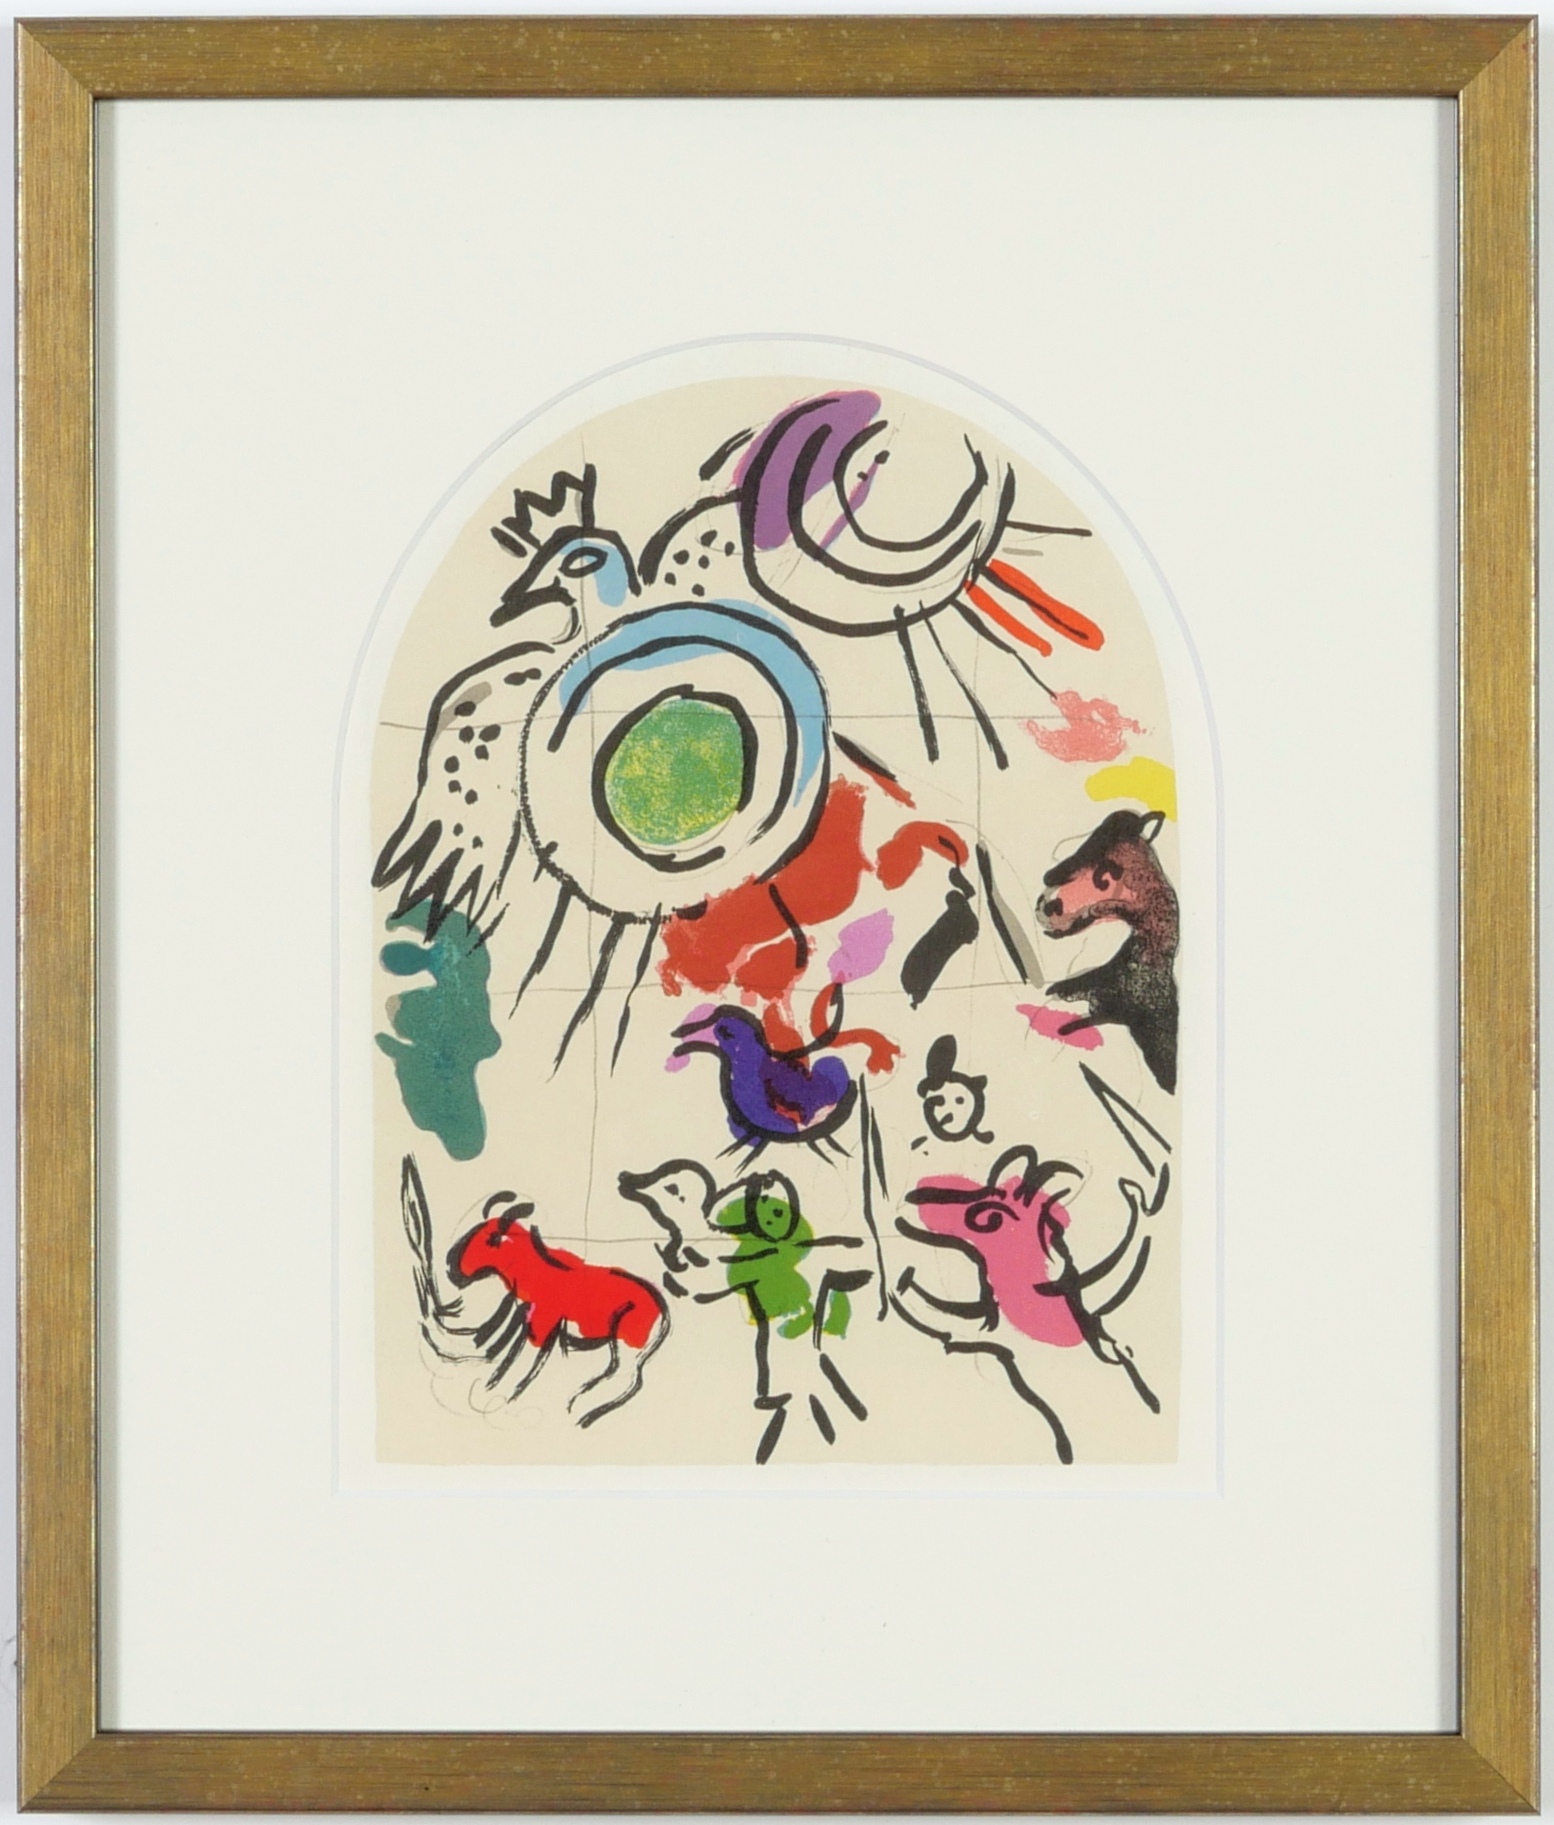 MARC CHAGALL, The Twelve Tribes, twelve lithographs in colour, printed in Paris by Mourlot 1962, - Image 9 of 13